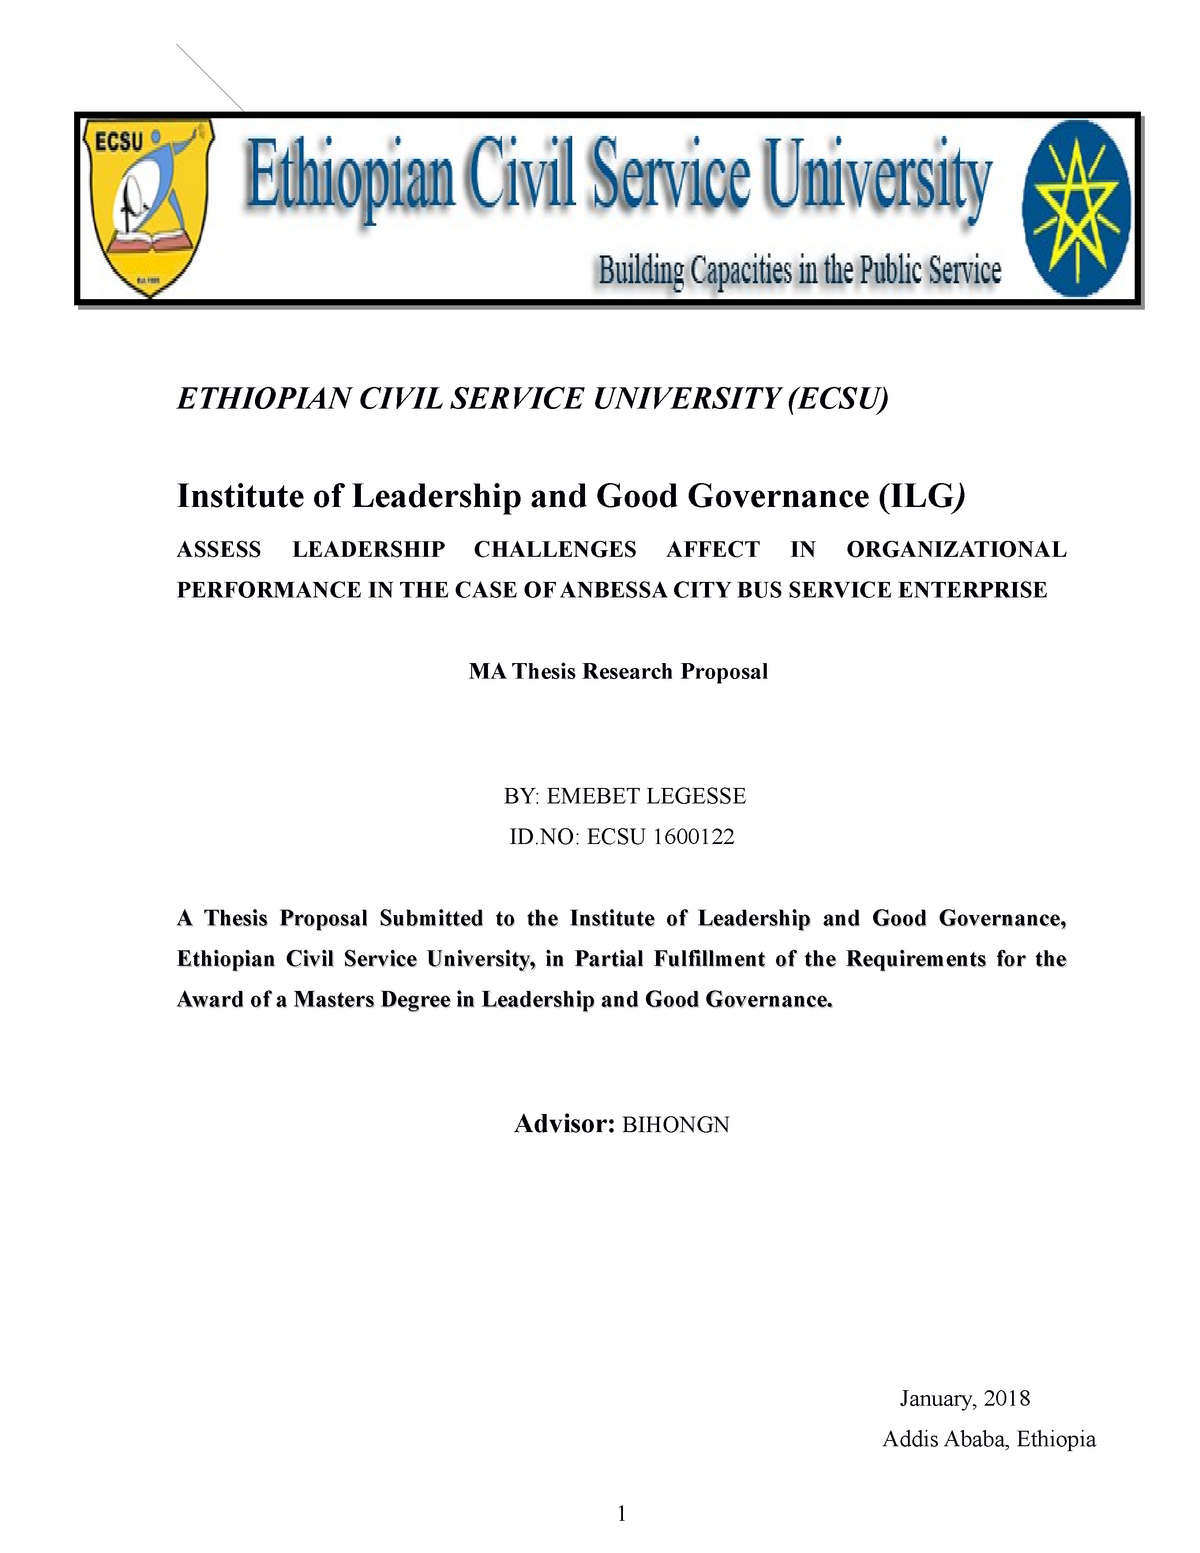 thesis in university